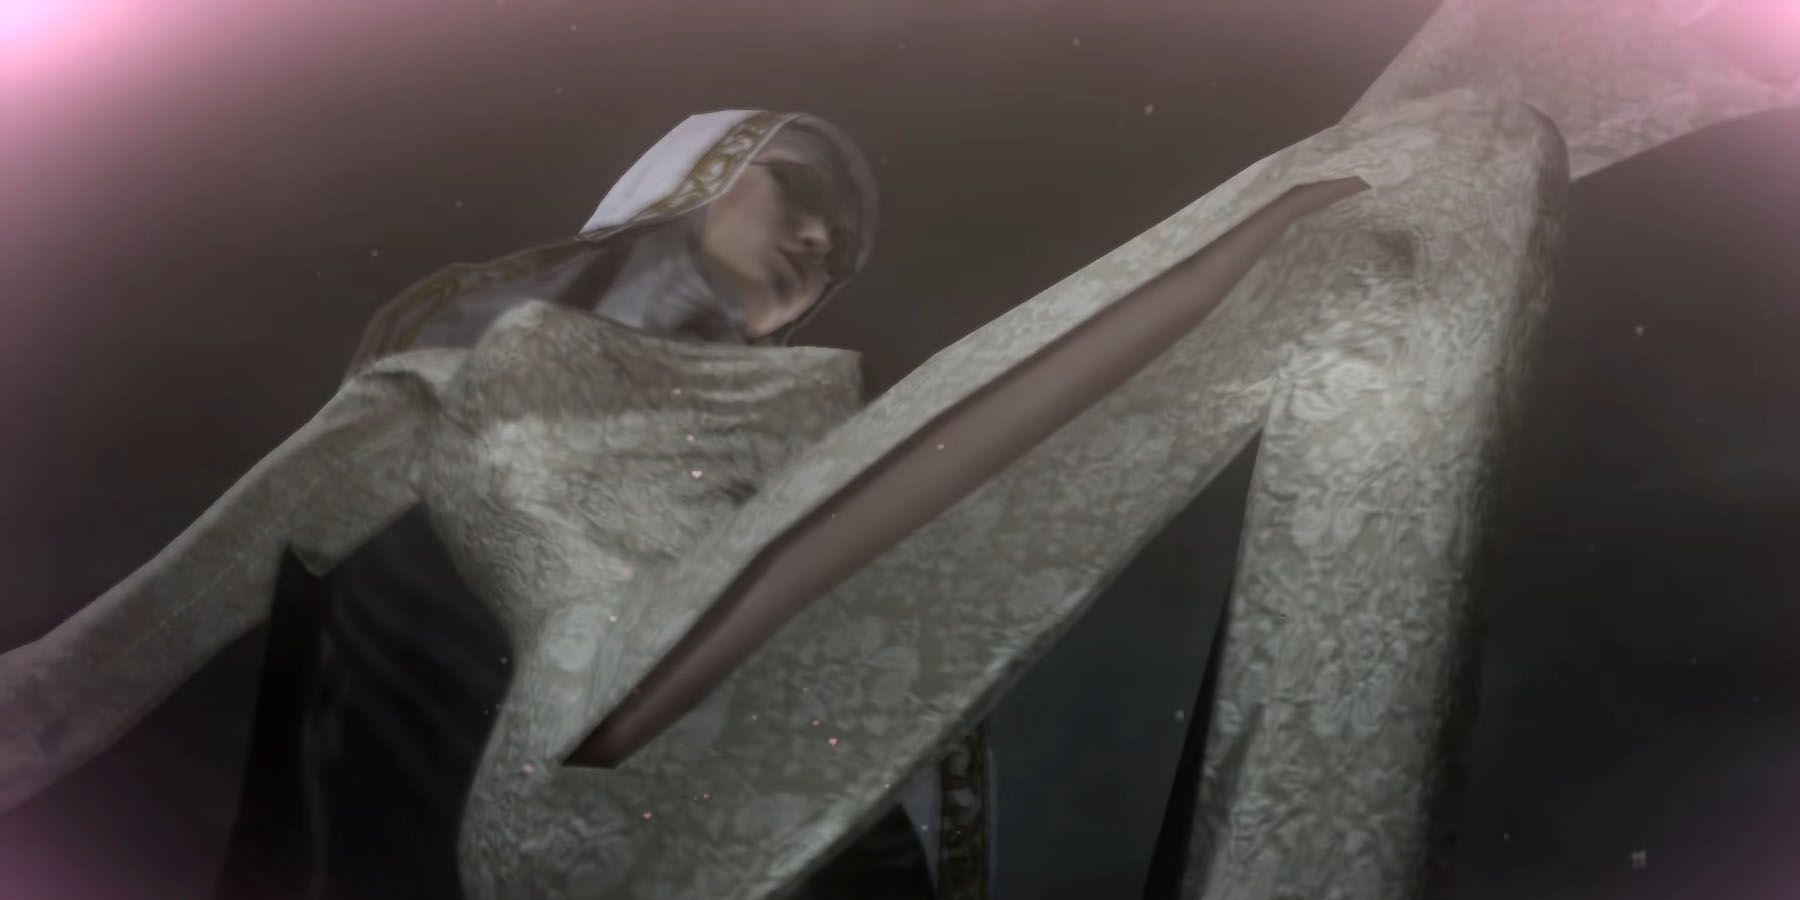 Bayonetta and her nun outfit